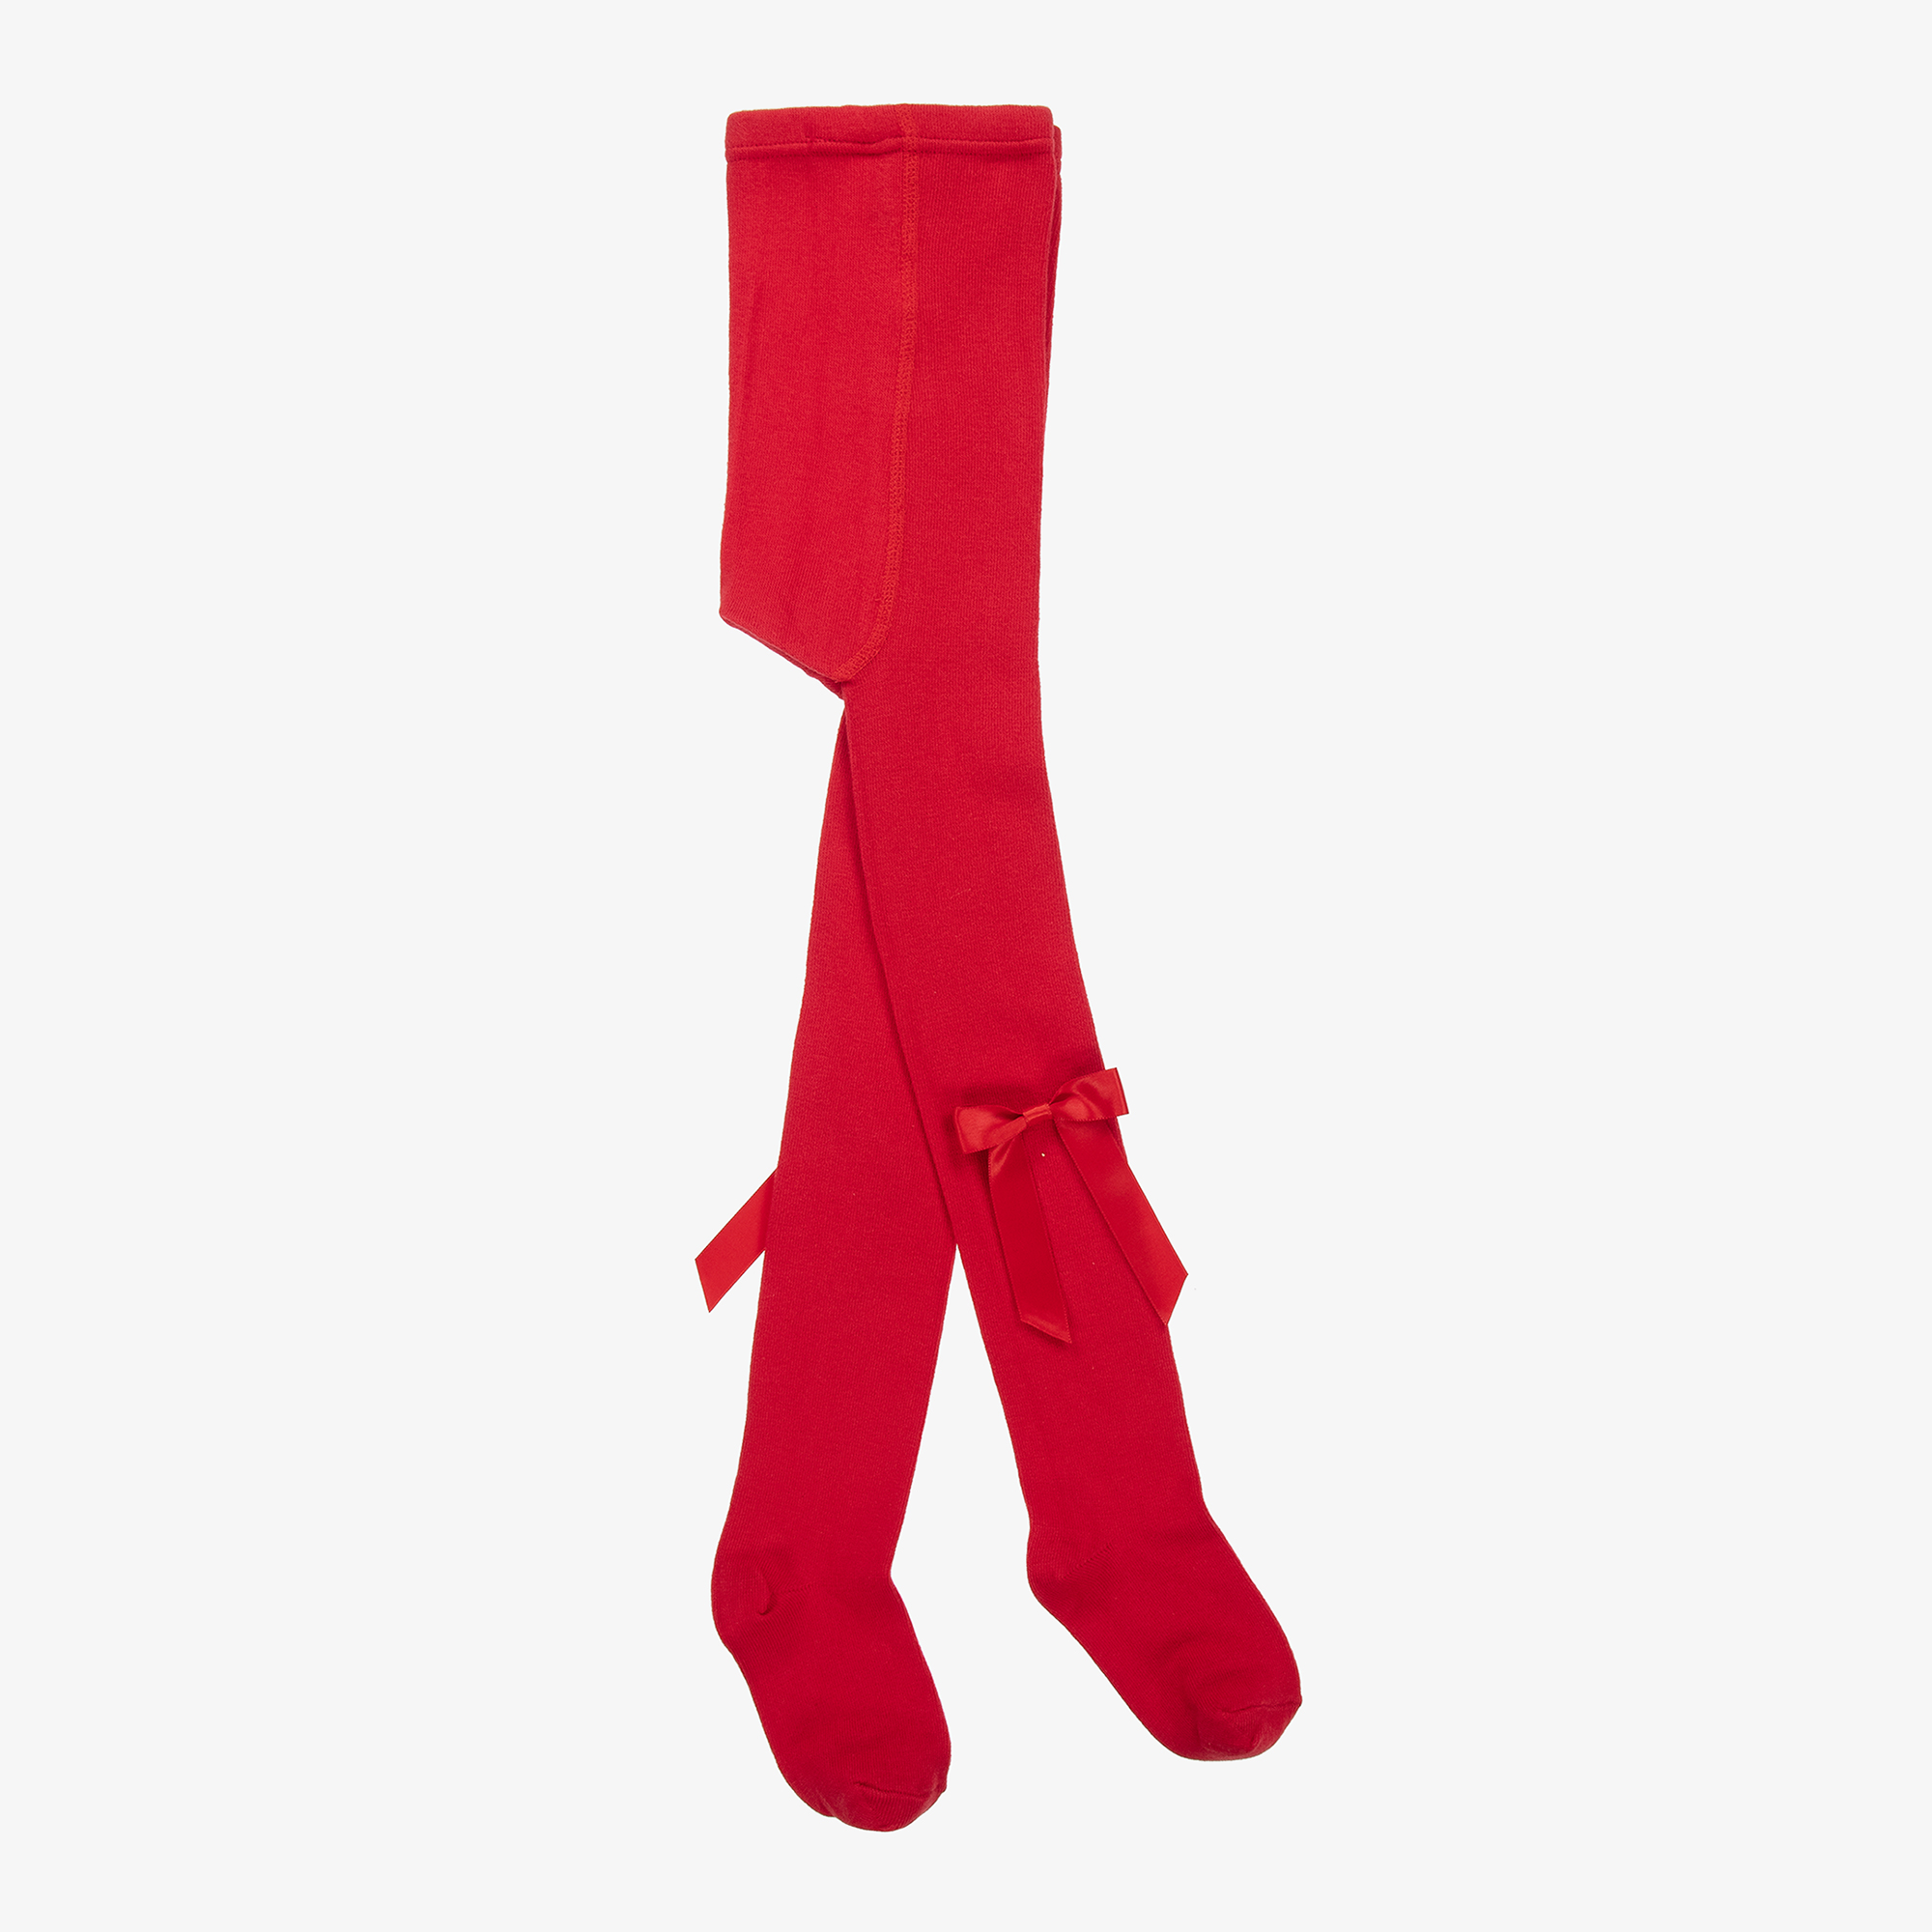 Carlomagno - Girls Red Cotton Bow Tights